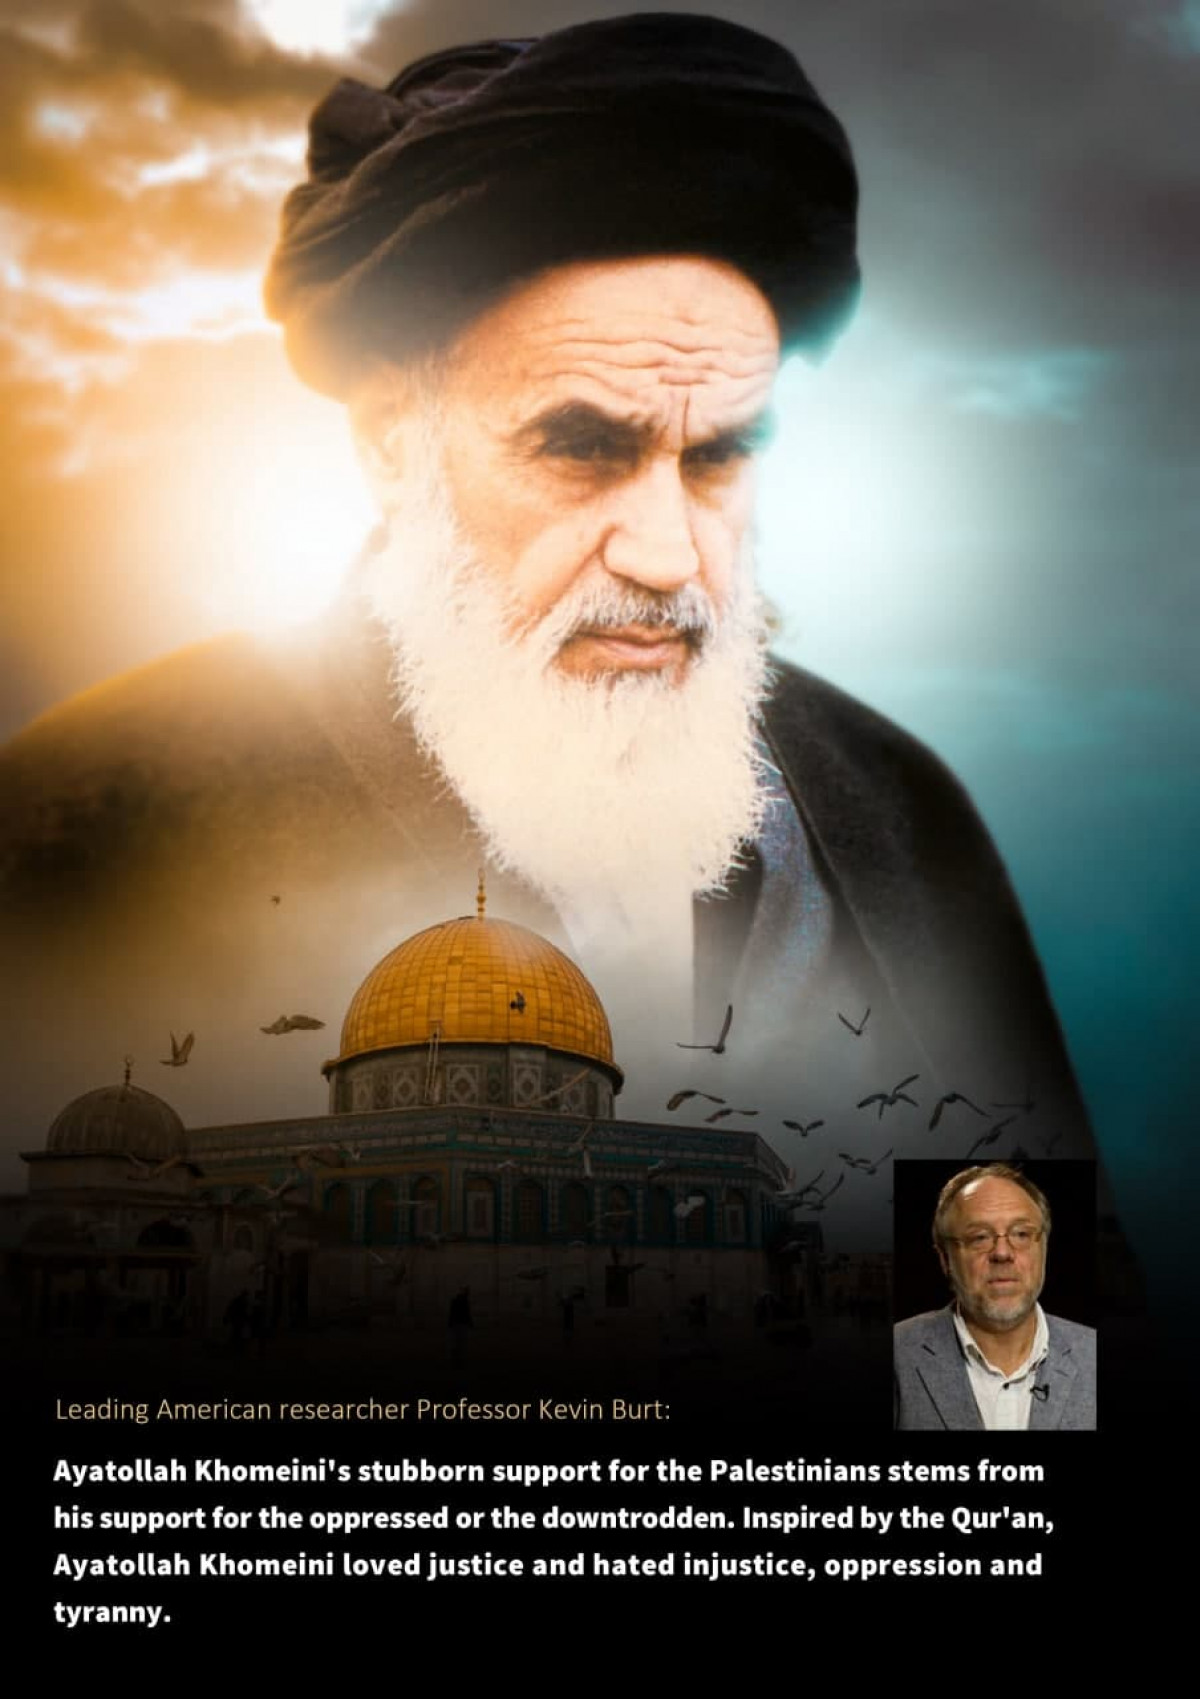 Ayatollah Khomeini's stubborn support for the Palestinians stems from his support for the oppressed or the downtrodden